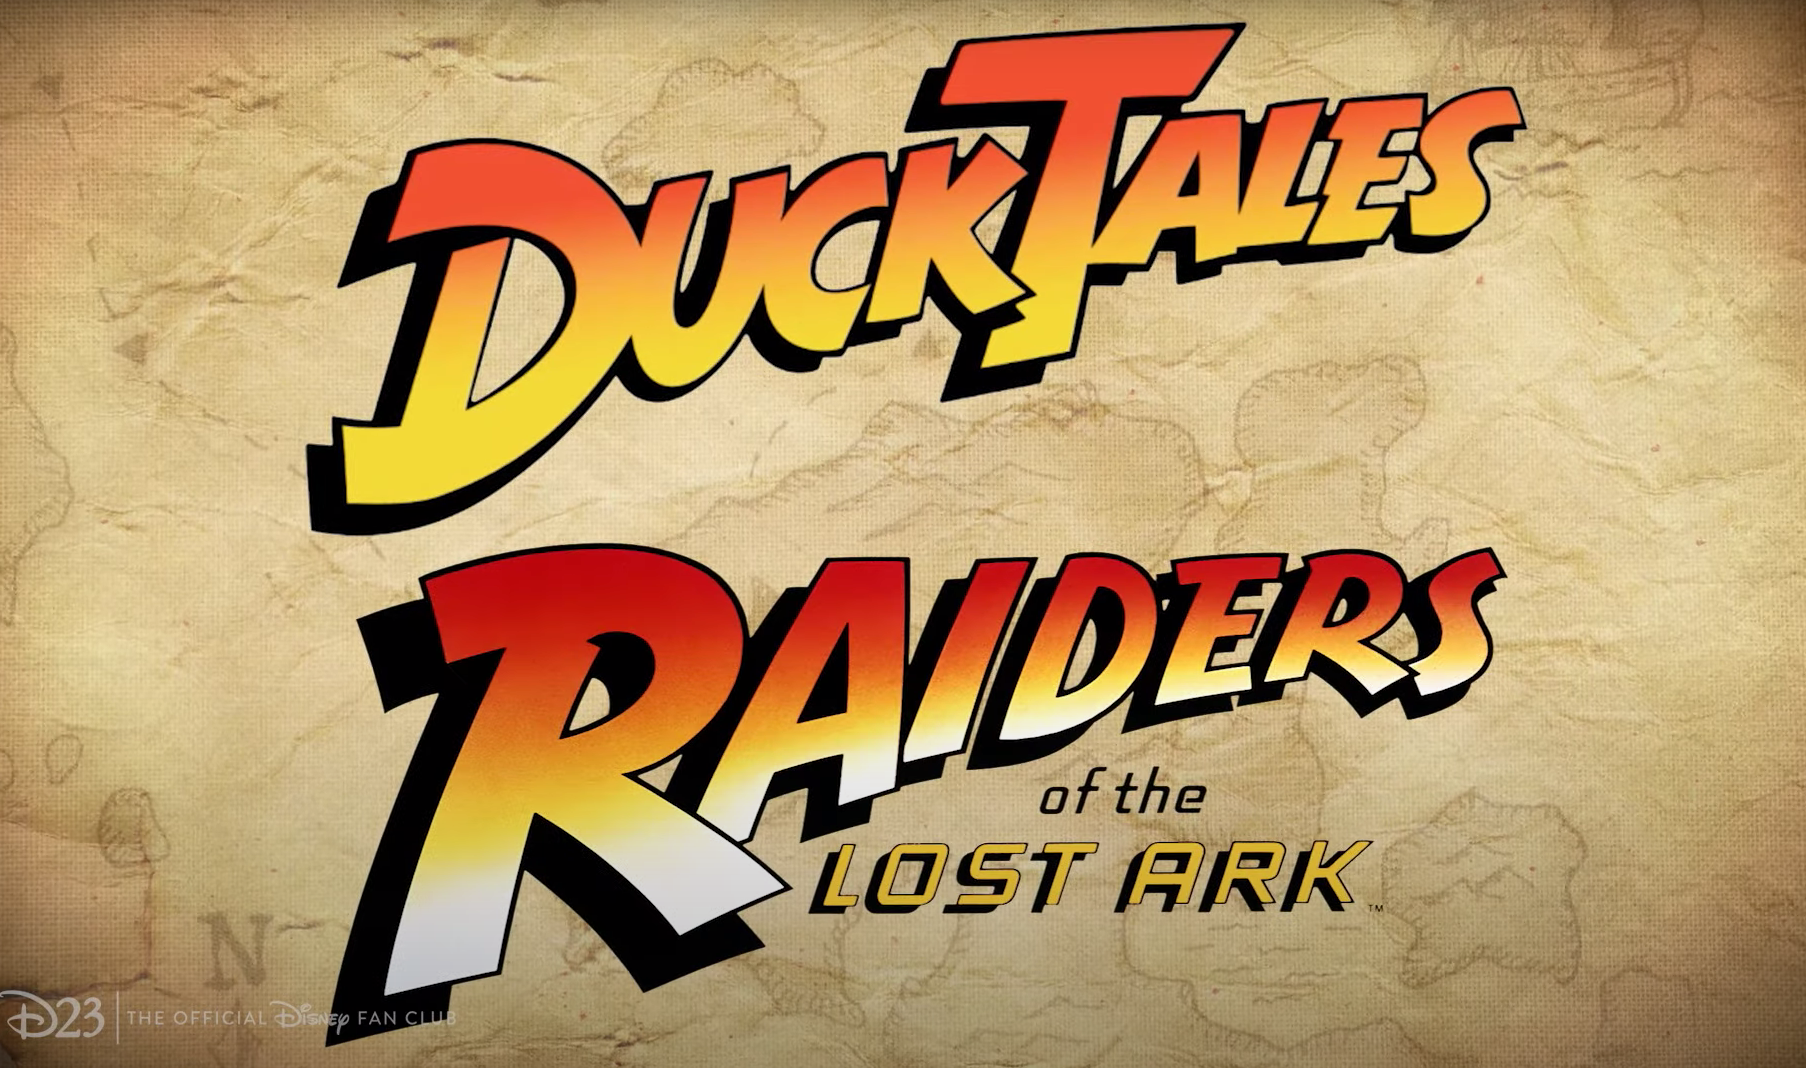 A screenshot of the DuckTales logo next to the Raiders of the Lost Ark logo